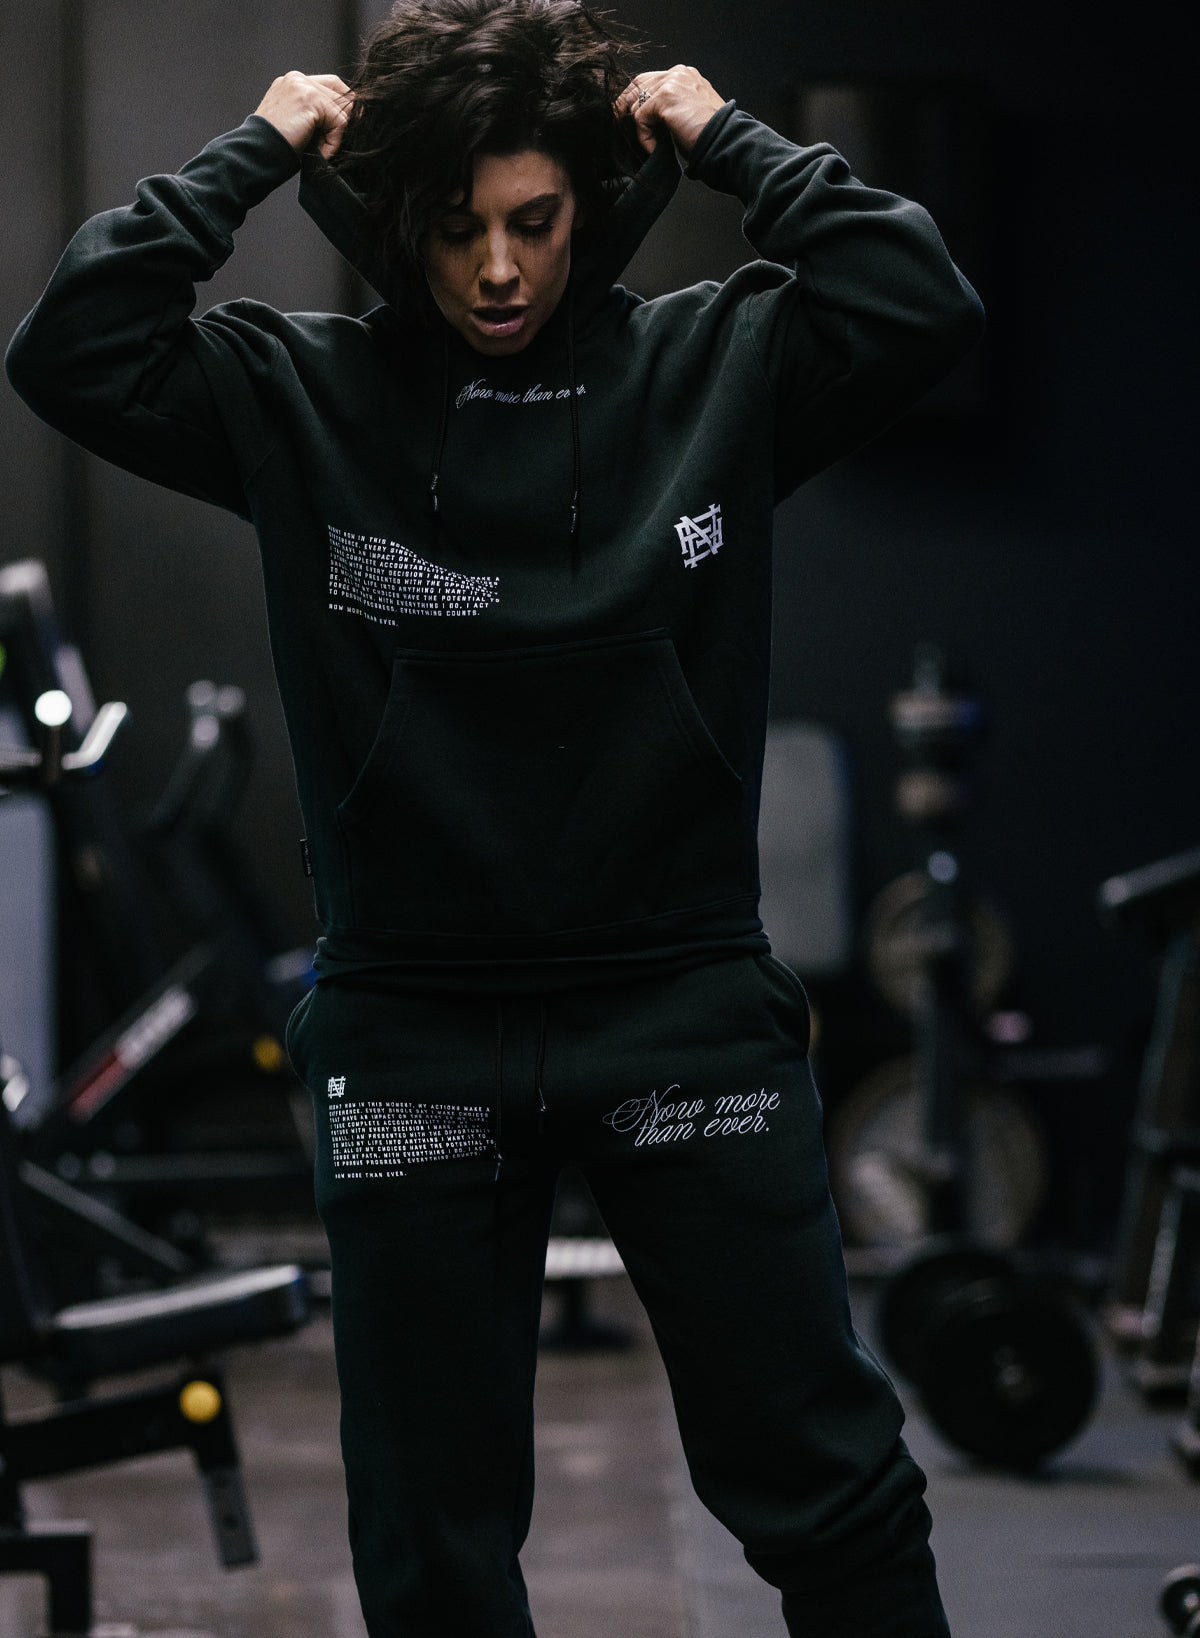 MORE THAN EVER CHAMP JOGGERS - BLACK